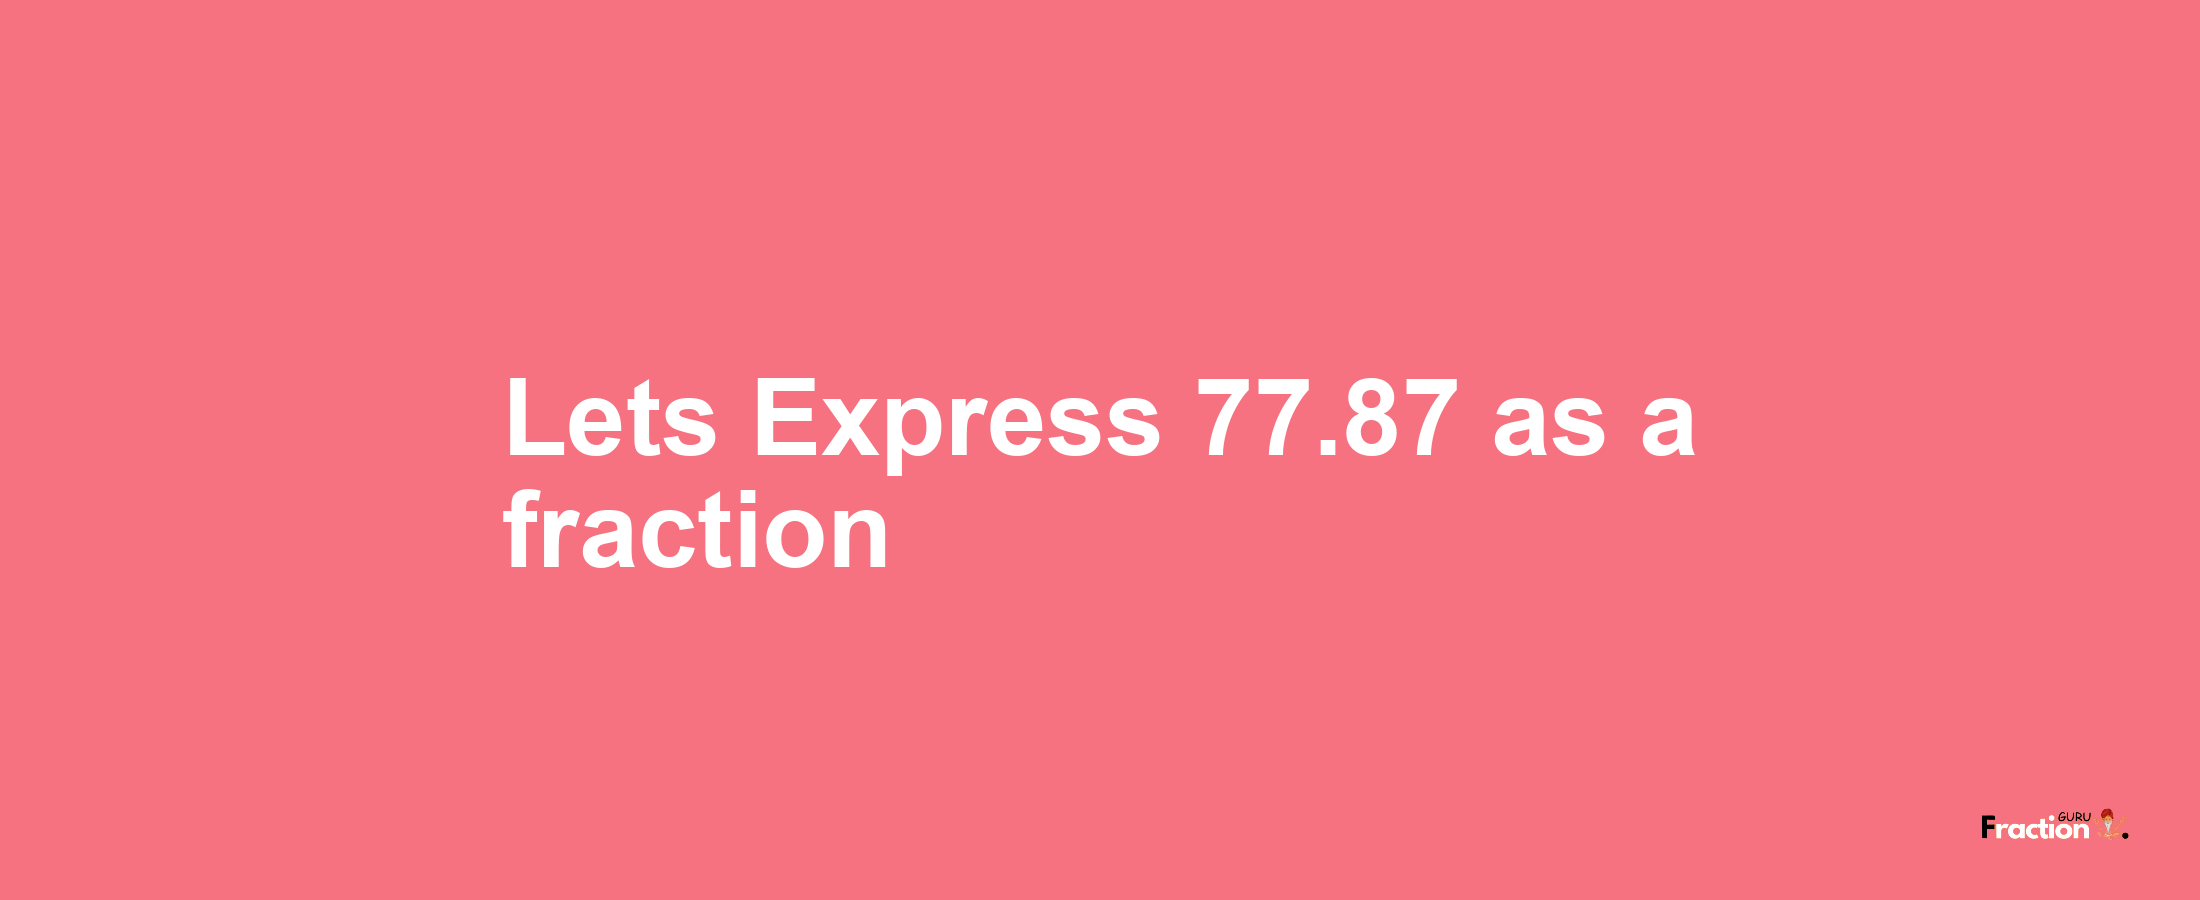 Lets Express 77.87 as afraction